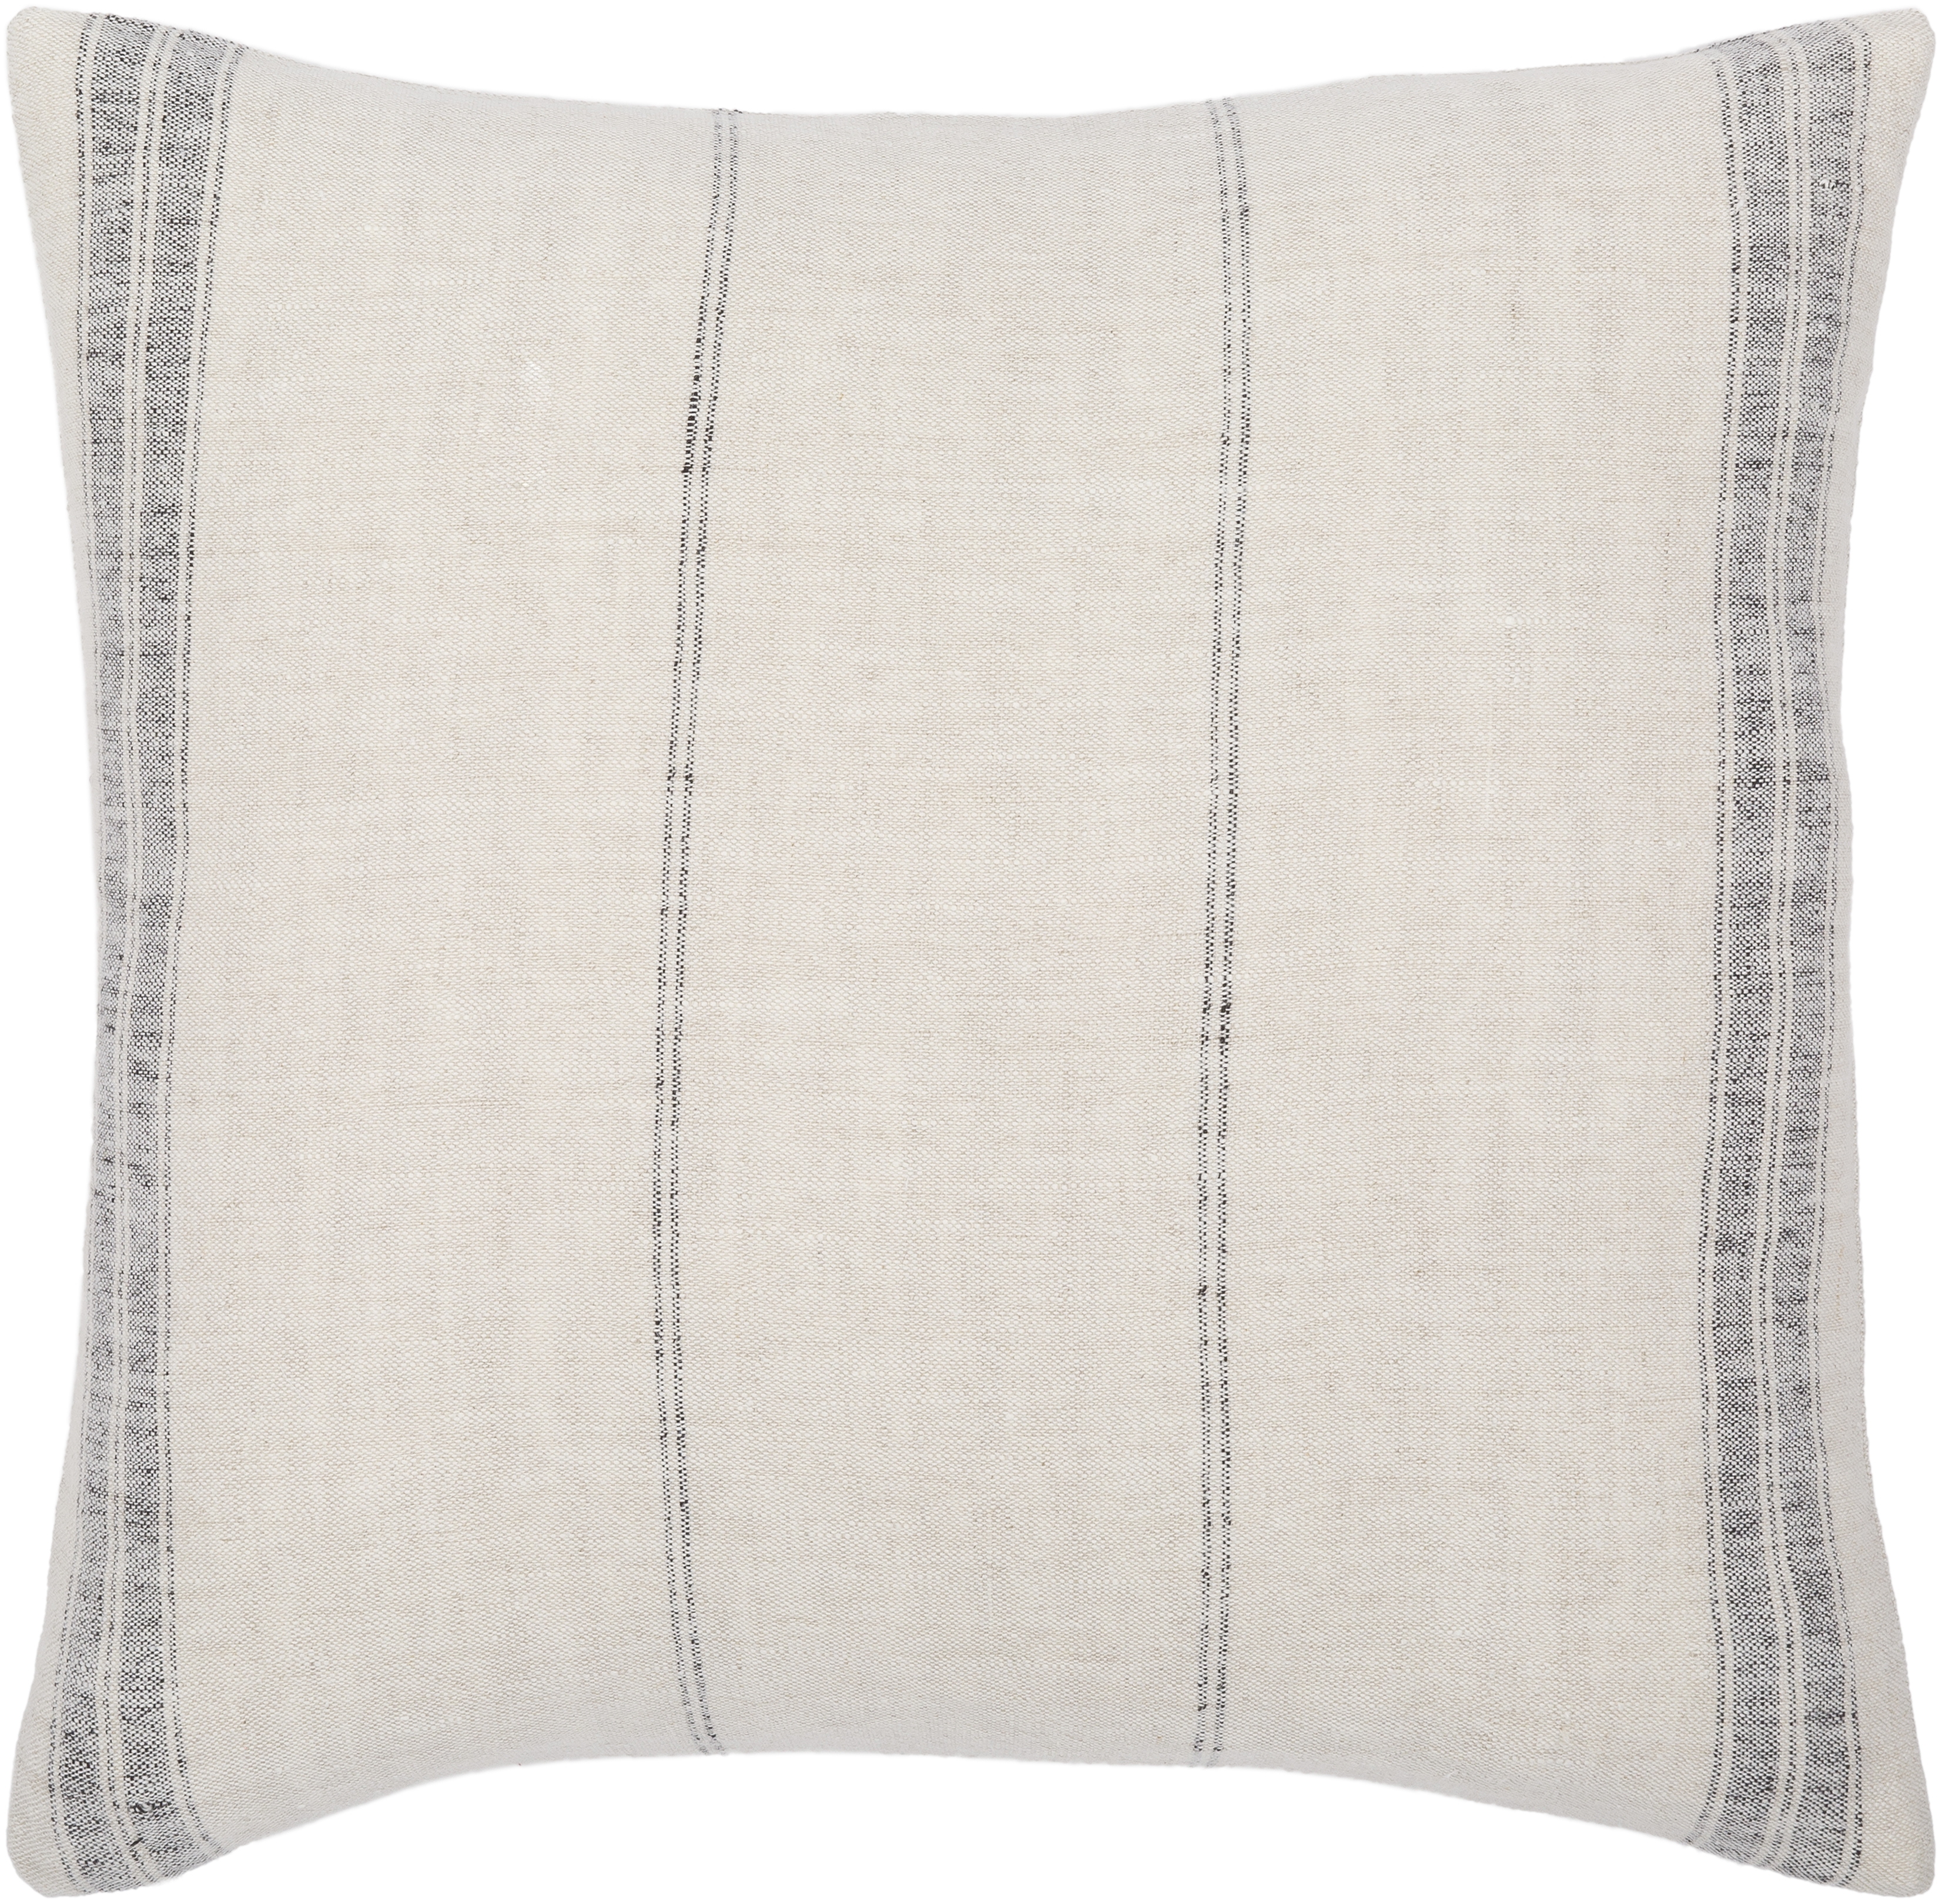 Linen Stripe Vintage Throw Pillow, 18" x 18", with down insert - Image 0